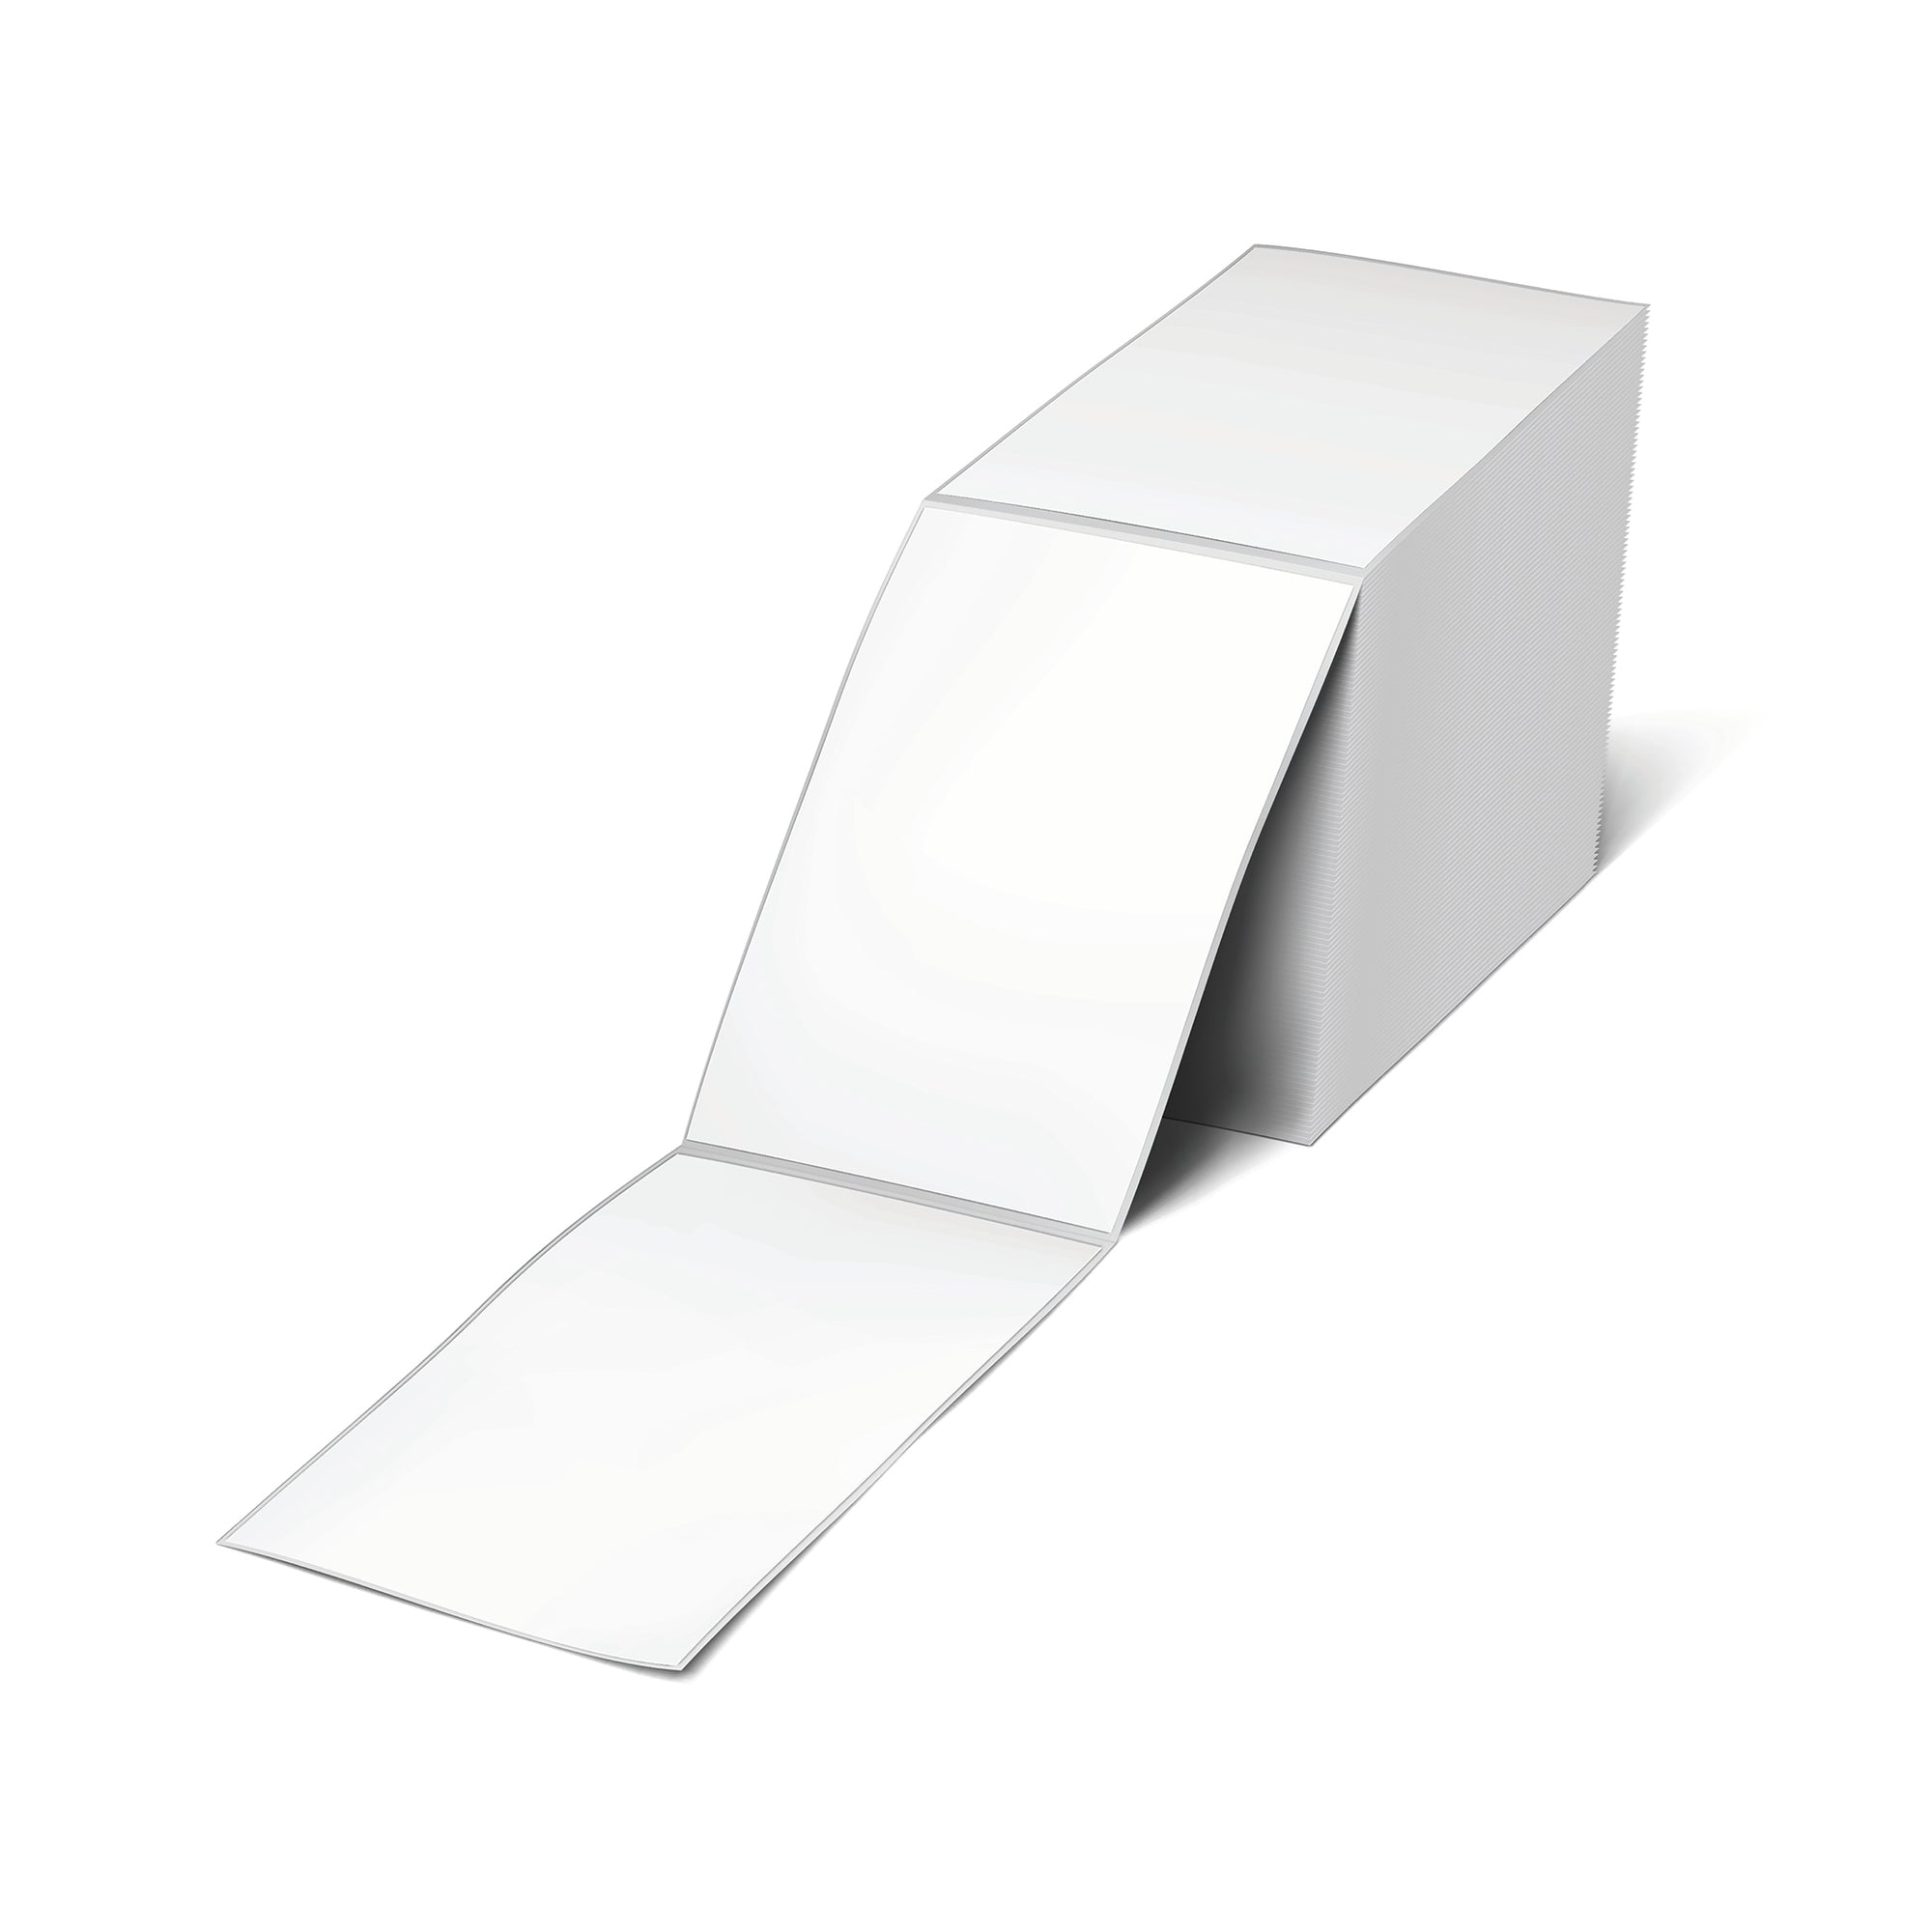 4X6 Thermal Label White Fanfold (500 Count)